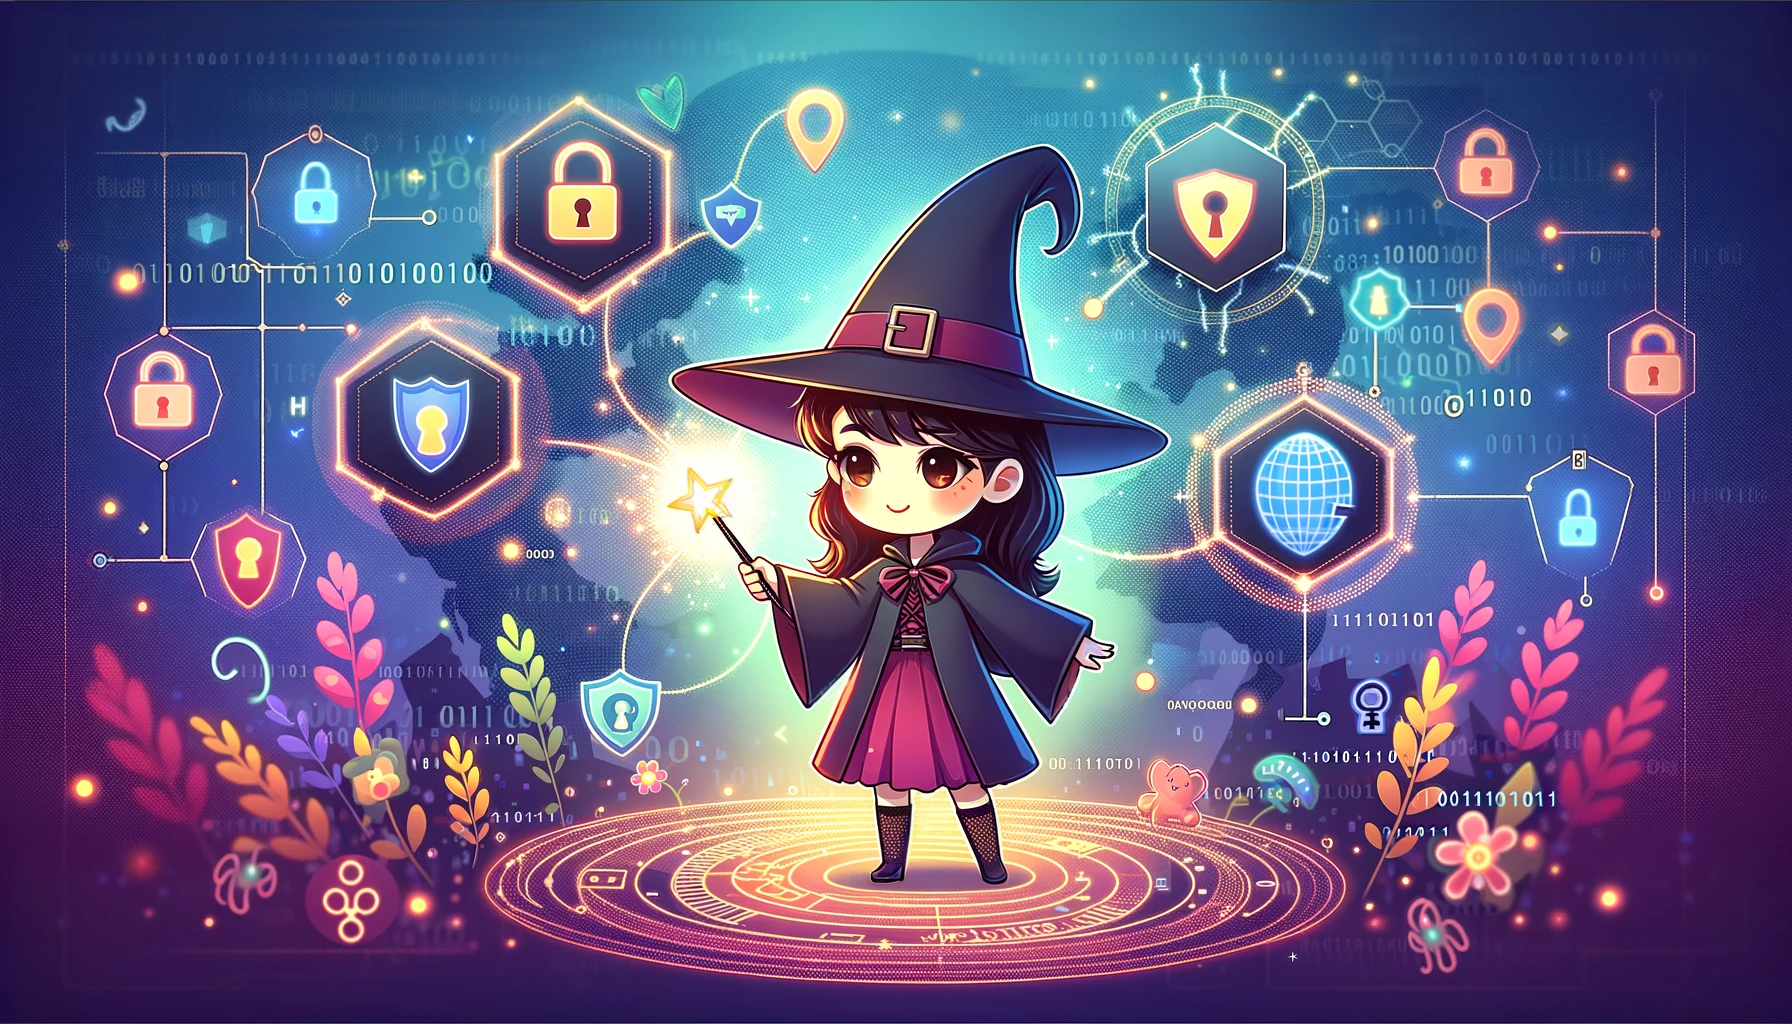 A cute 'chibi' style illustration of a female magician, standing with a confident smile, holding a wand in one hand and a glowing orb in the other. She is surrounded by digital icons representing cybersecurity, like shields, locks, and binary code, all against a backdrop of a stylized map that suggests a journey. The colors are vibrant, and the atmosphere conveys a sense of adventure and knowledge in the field of cybersecurity. The image is designed to represent the empowering journey of learning and mastering cybersecurity, as discussed in an article. The aspect ratio is 16:9.